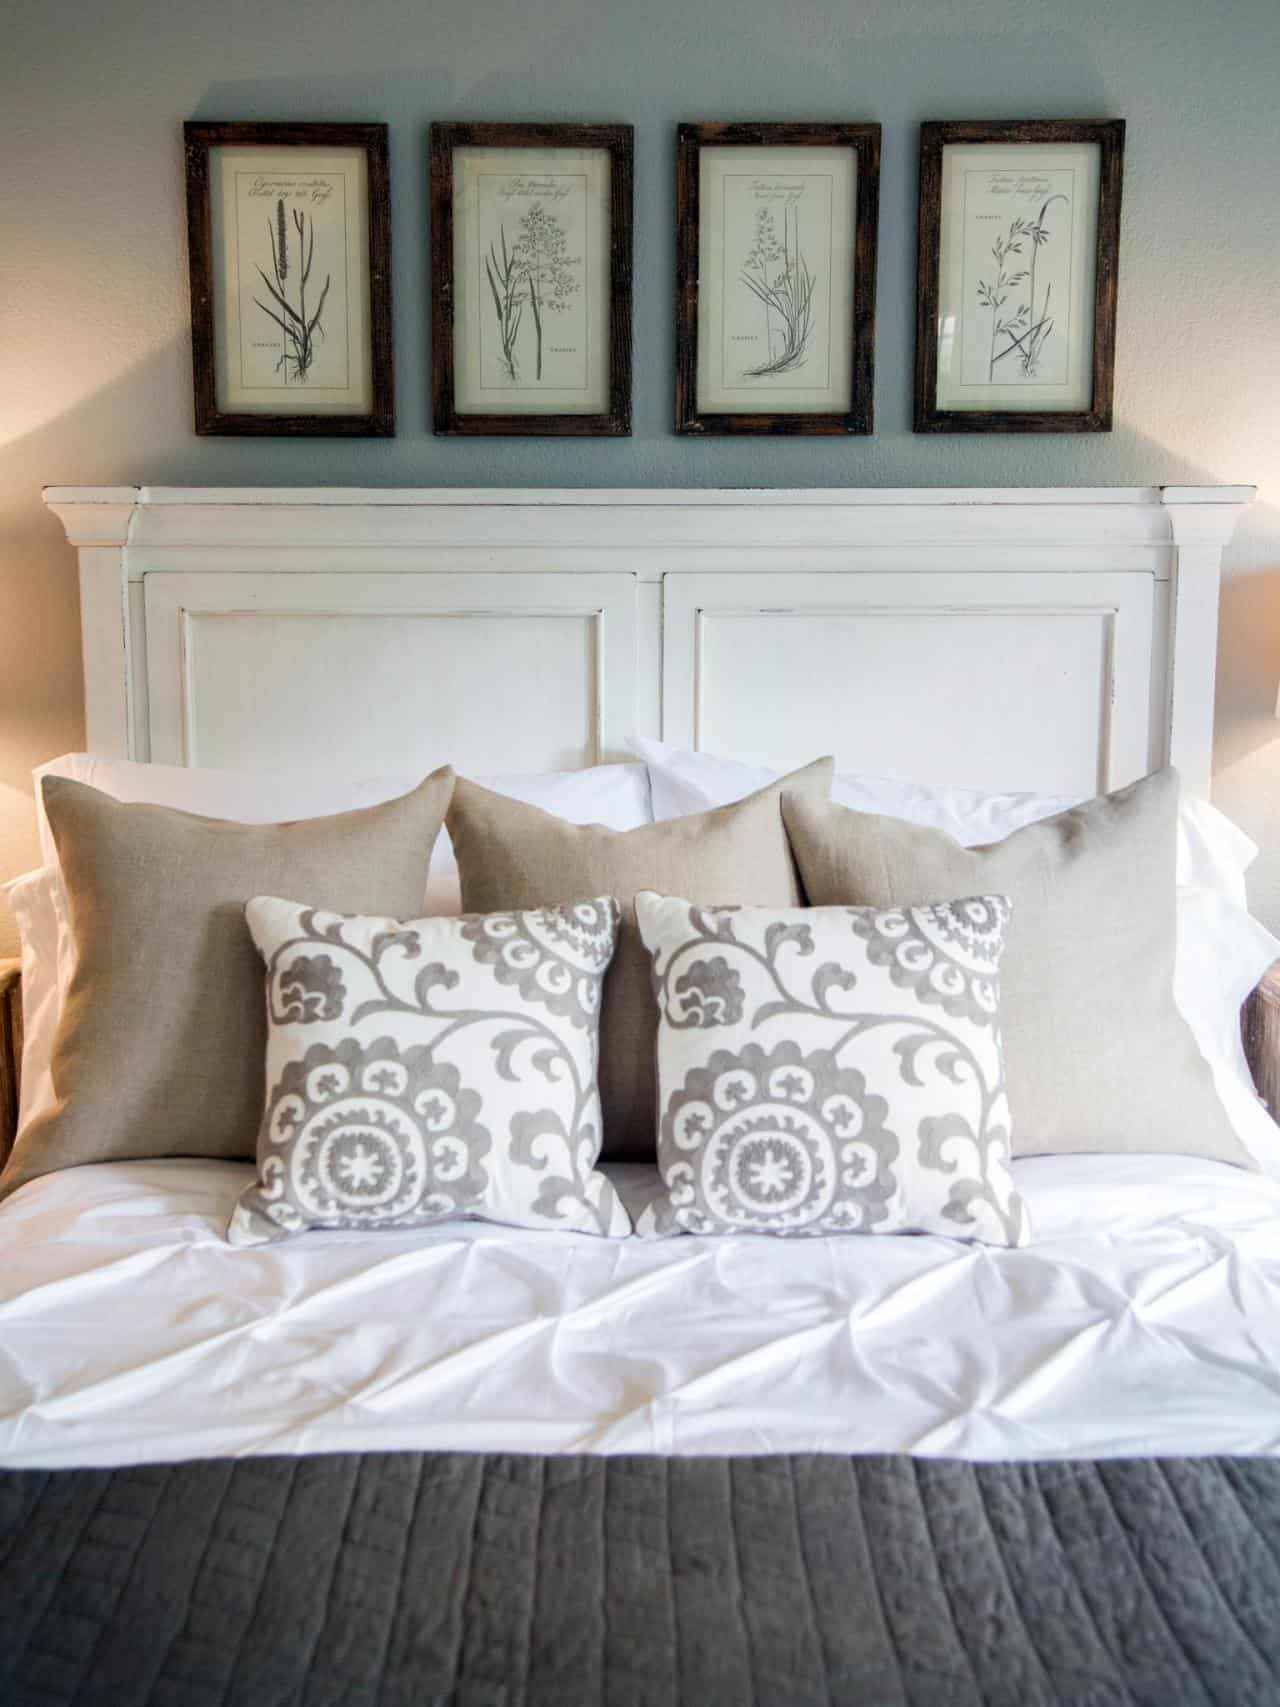 A bed with white, grey and beige bedding and pillows, a white headboard and four tall pieces of artwork above featuring botanical drawings